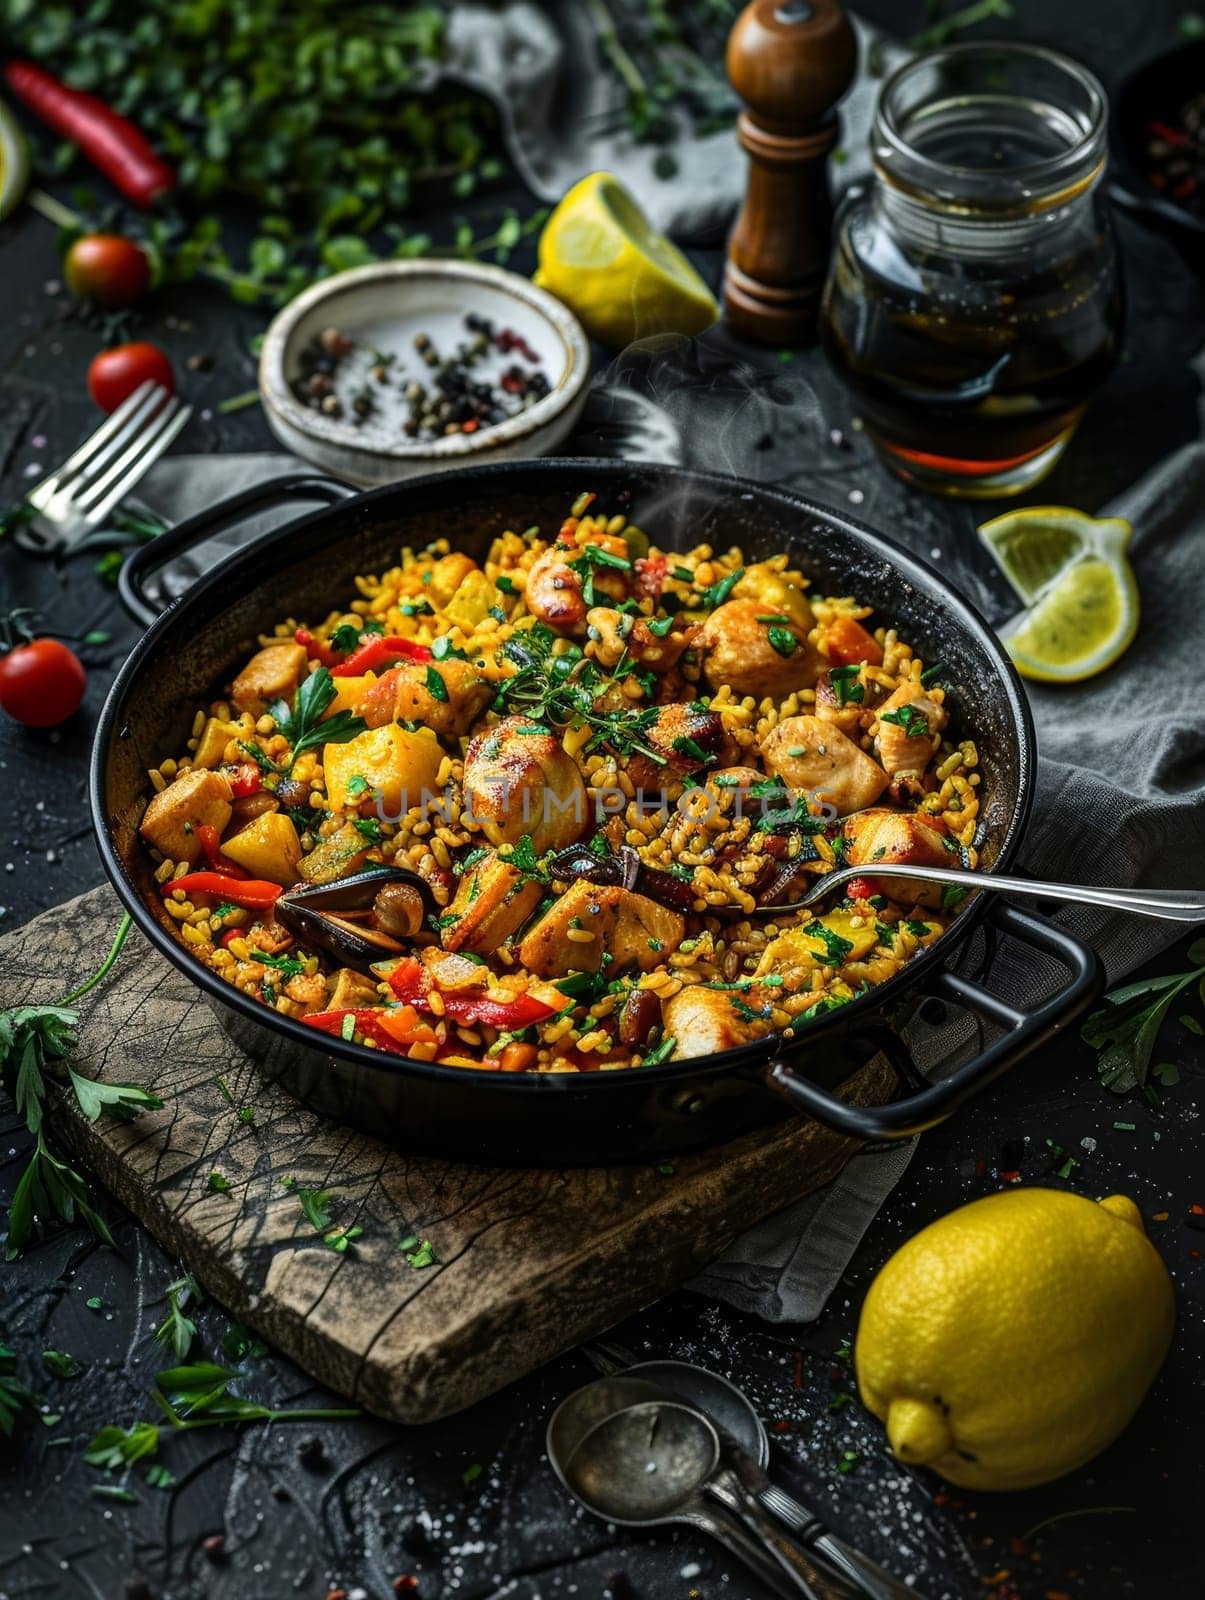 Authentic Spanish paella with seafood, chicken, and saffron rice, cooked in a traditional paella pan. A delicious and colorful dish representing the flavors of Spain. by sfinks